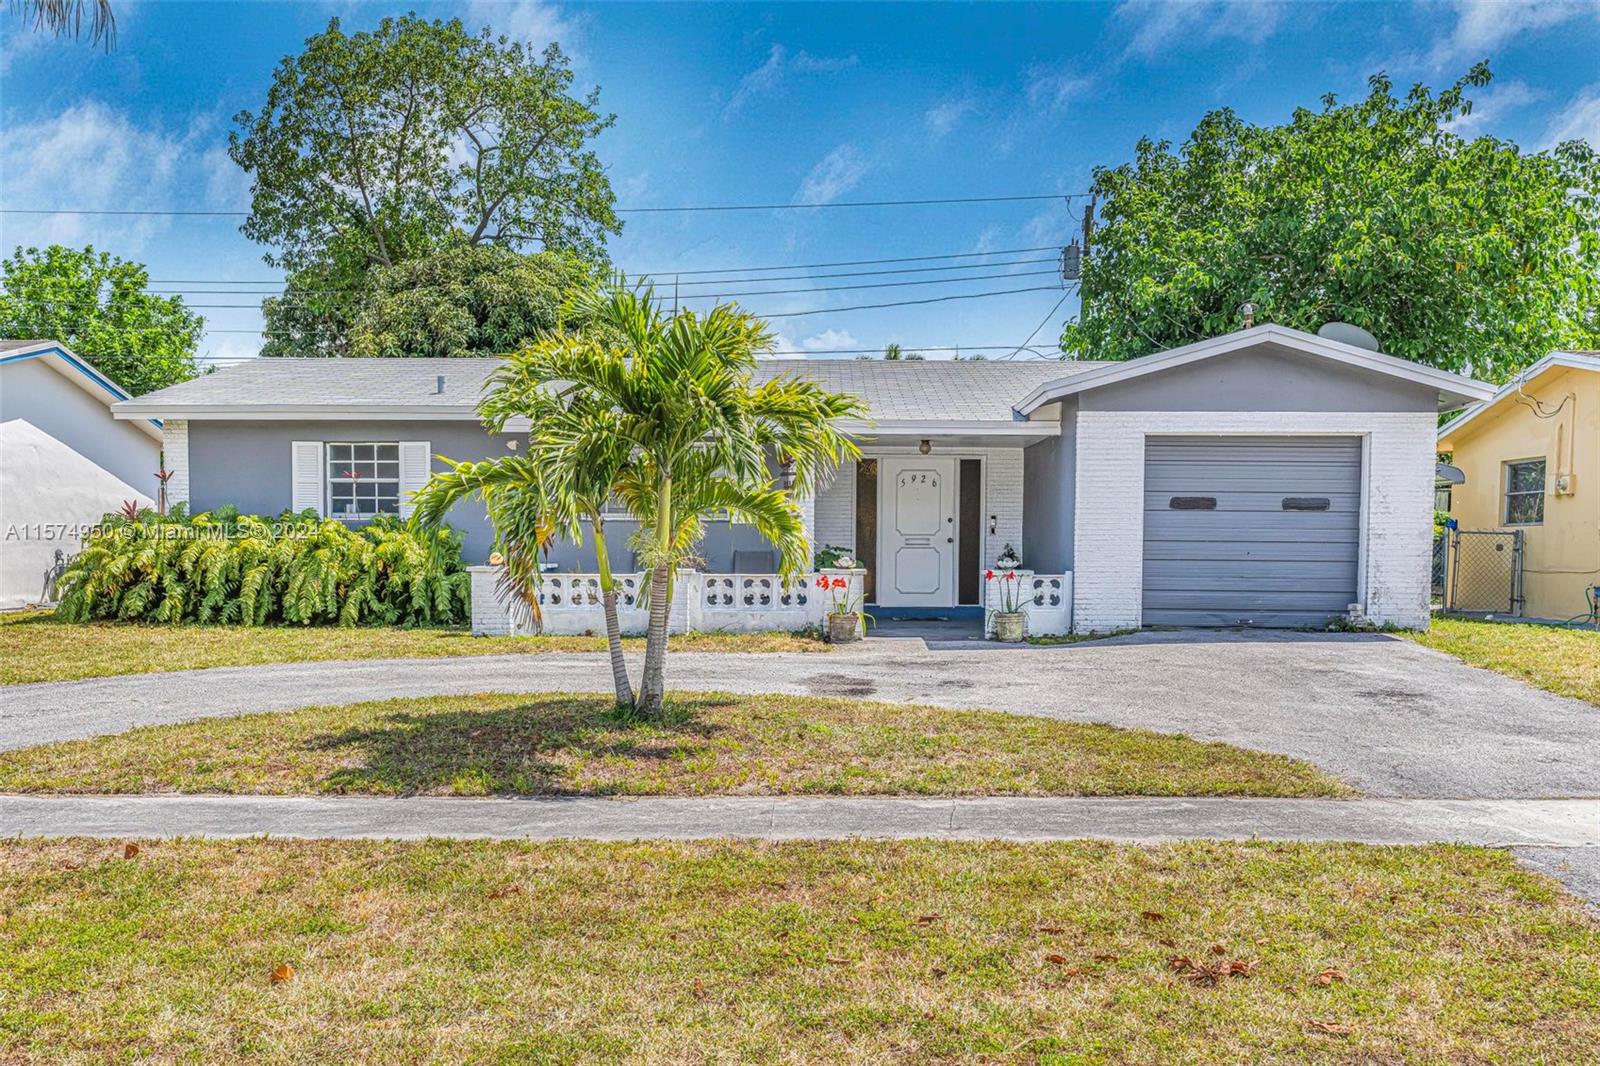 5926 NW 15th Ct, Sunrise, Florida 33313, 3 Bedrooms Bedrooms, ,2 BathroomsBathrooms,Residential,For Sale,5926 NW 15th Ct,A11574950